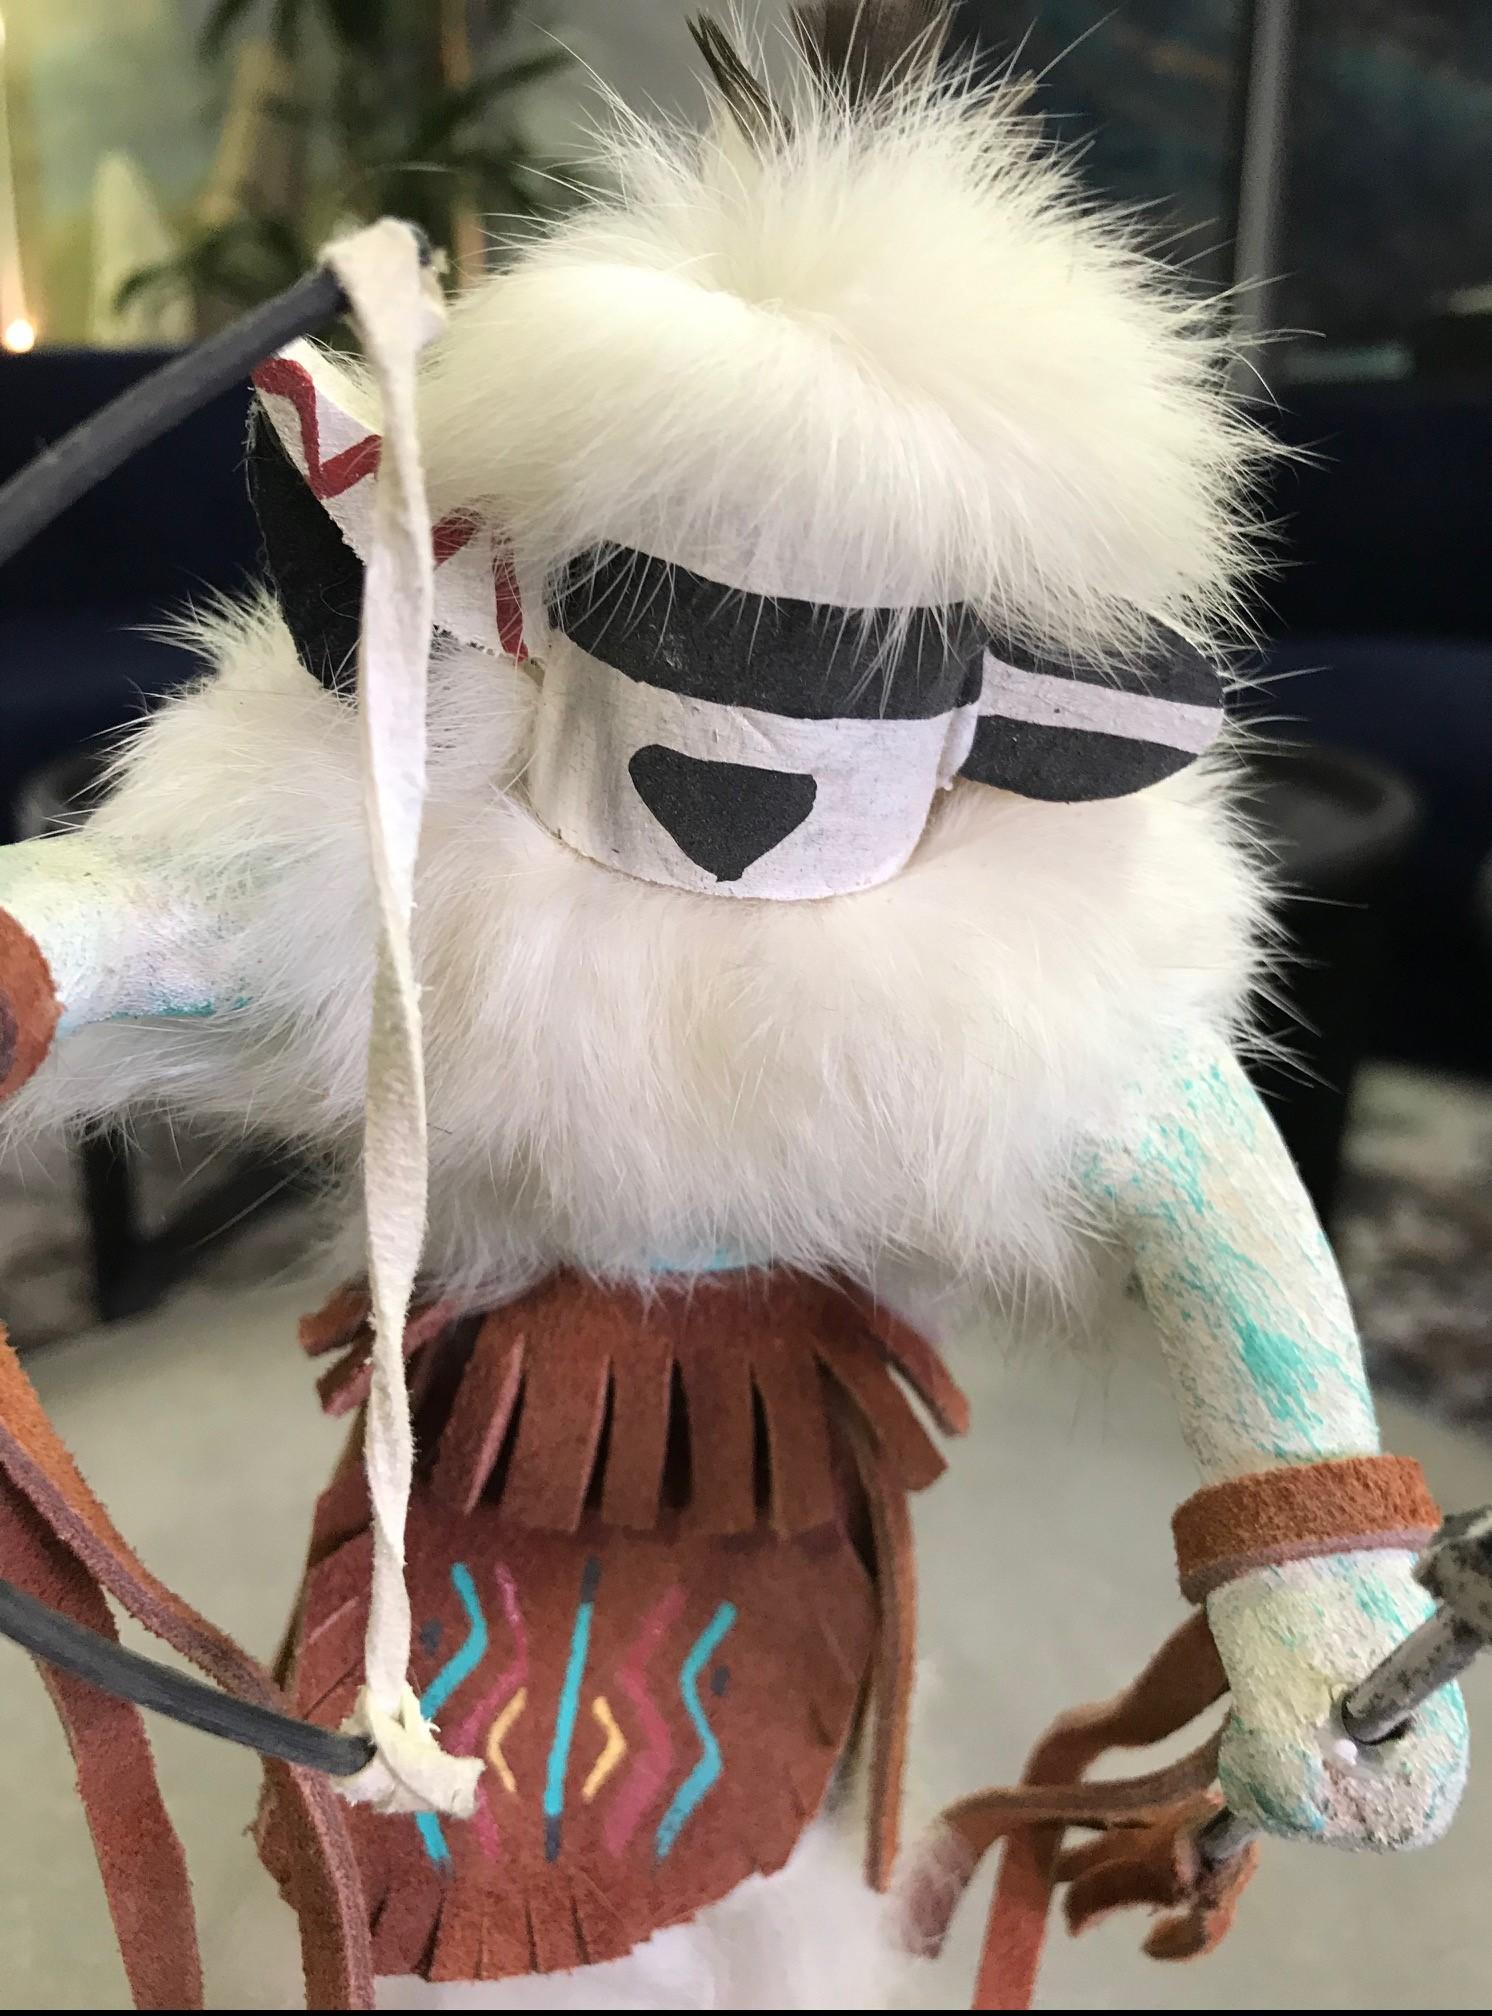 A wonderfully detailed and decorated Kachina doll with white fur.

Signed by the artist on the base.

From a collection of Native American objects and artifacts.

Dimensions: 8